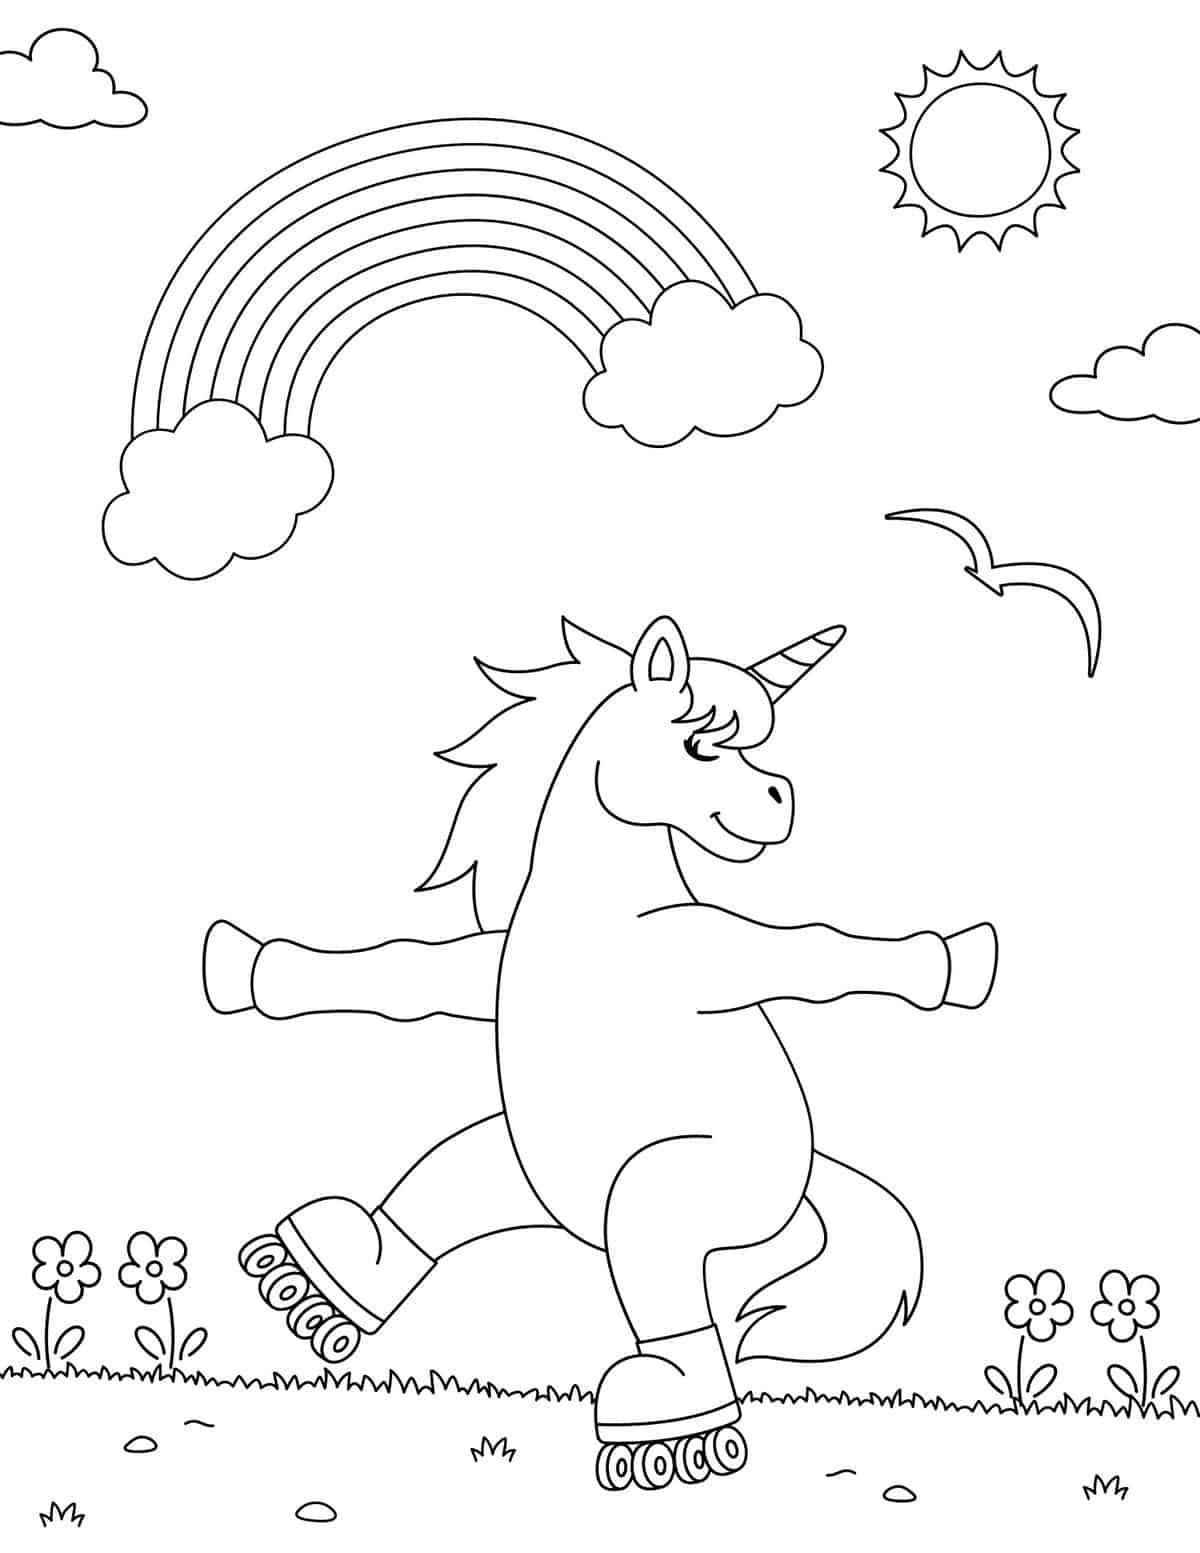 rolling skating unicorn coloring page